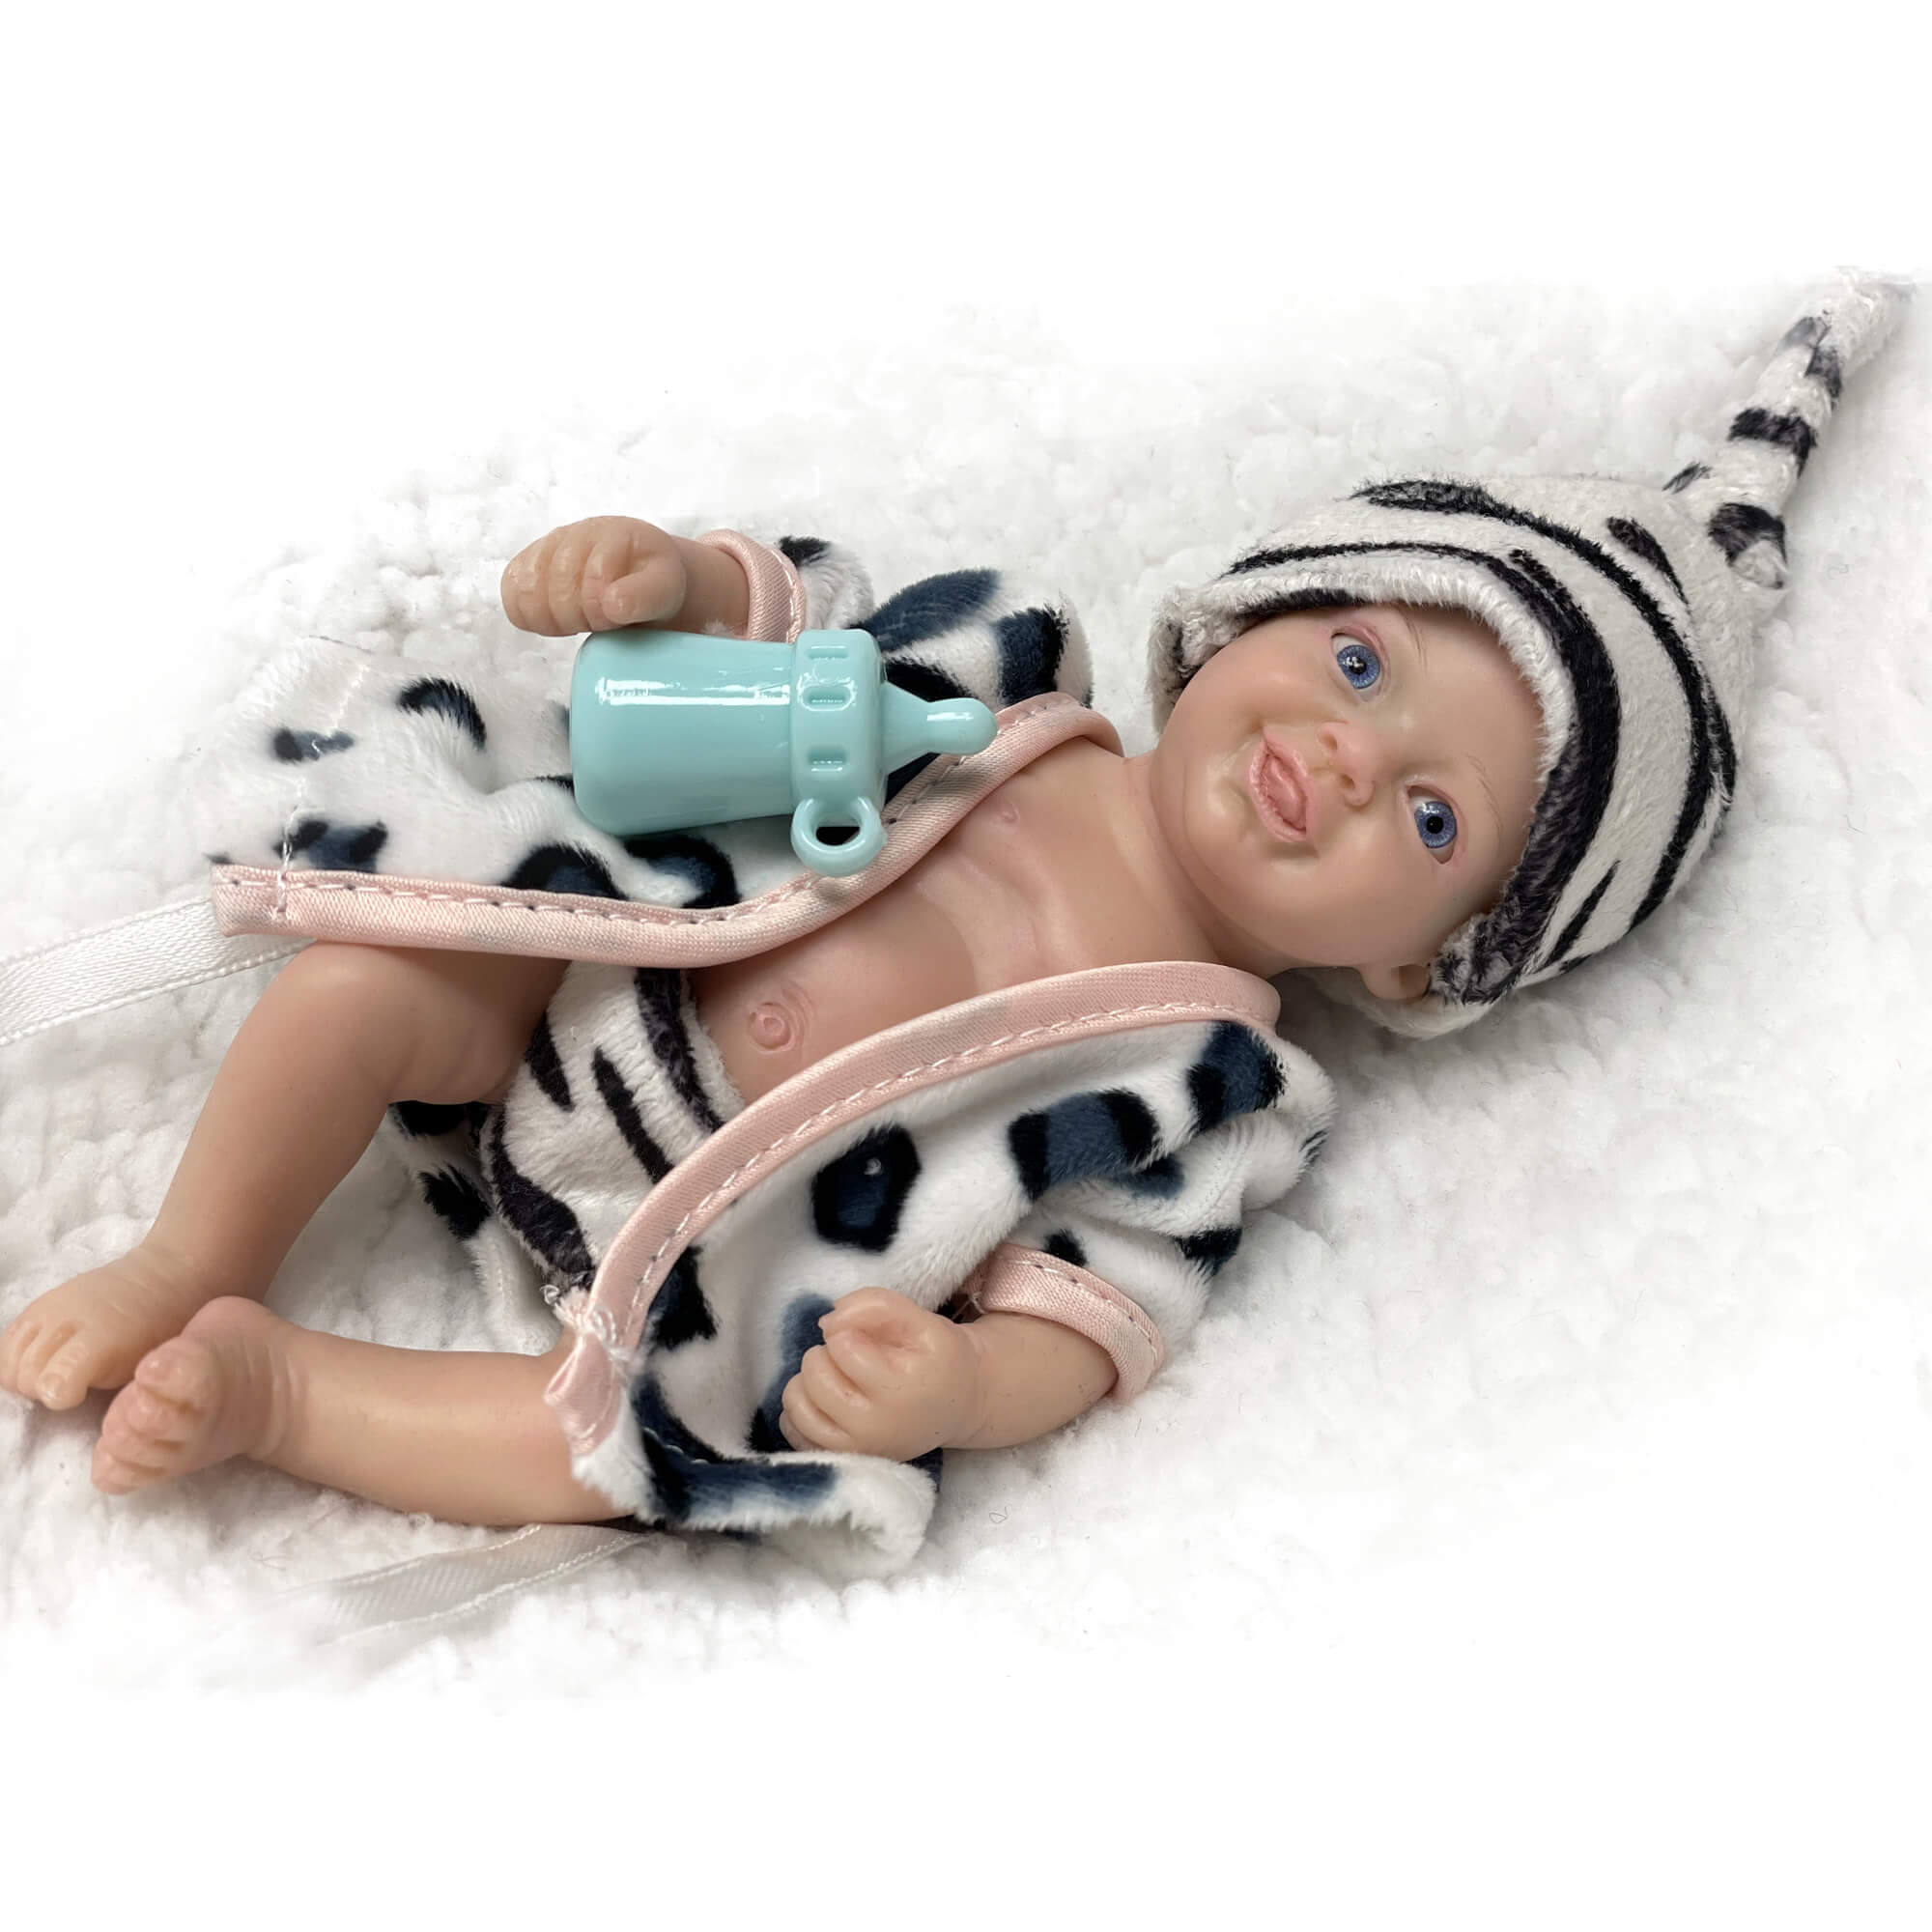 6 Inch Newborn Reborn Baby Boy and Clothes Set Washable Realistic Soft Silicone Baby Dolls